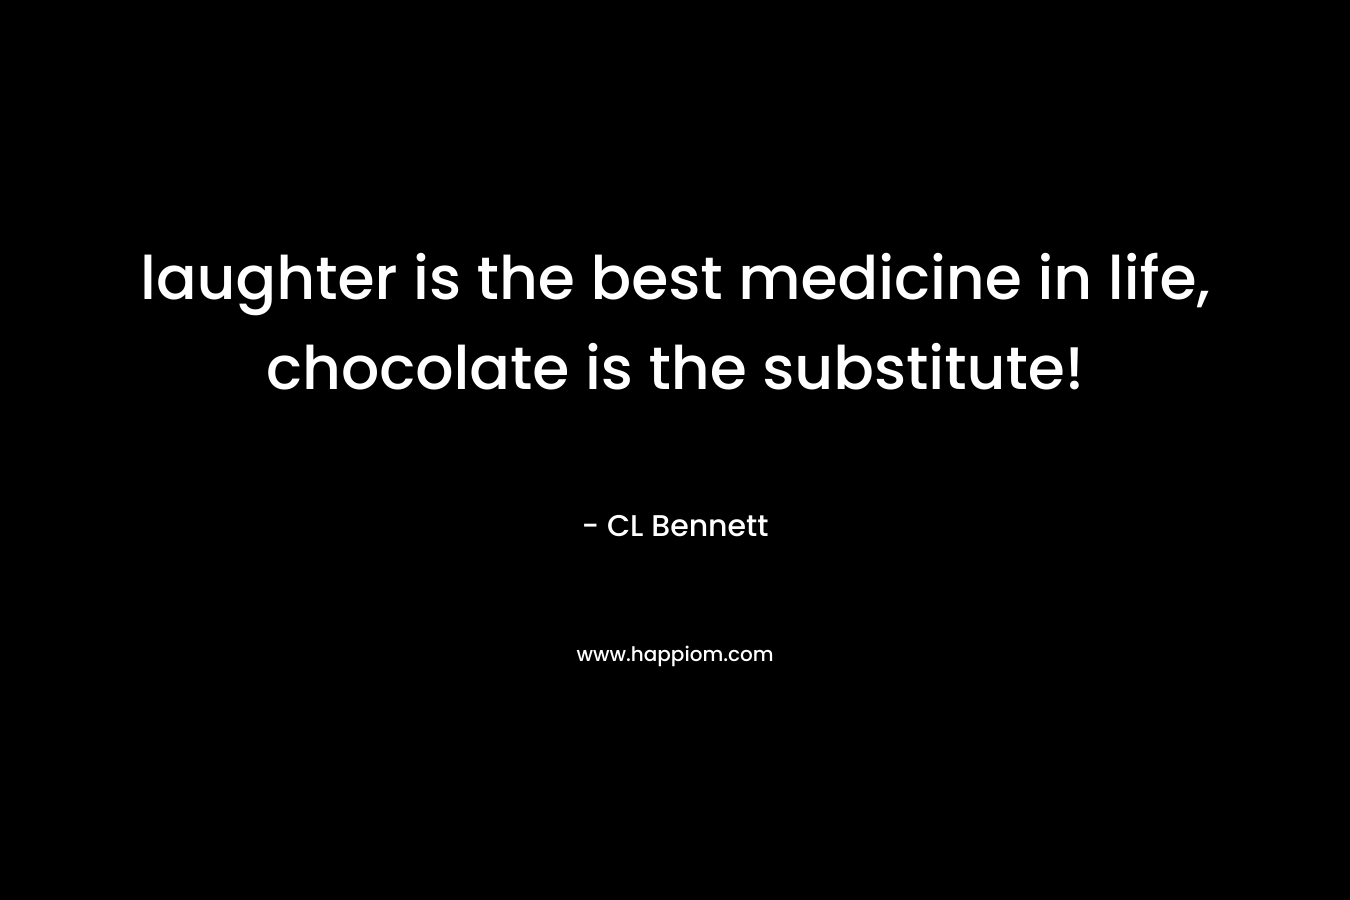 laughter is the best medicine in life, chocolate is the substitute!